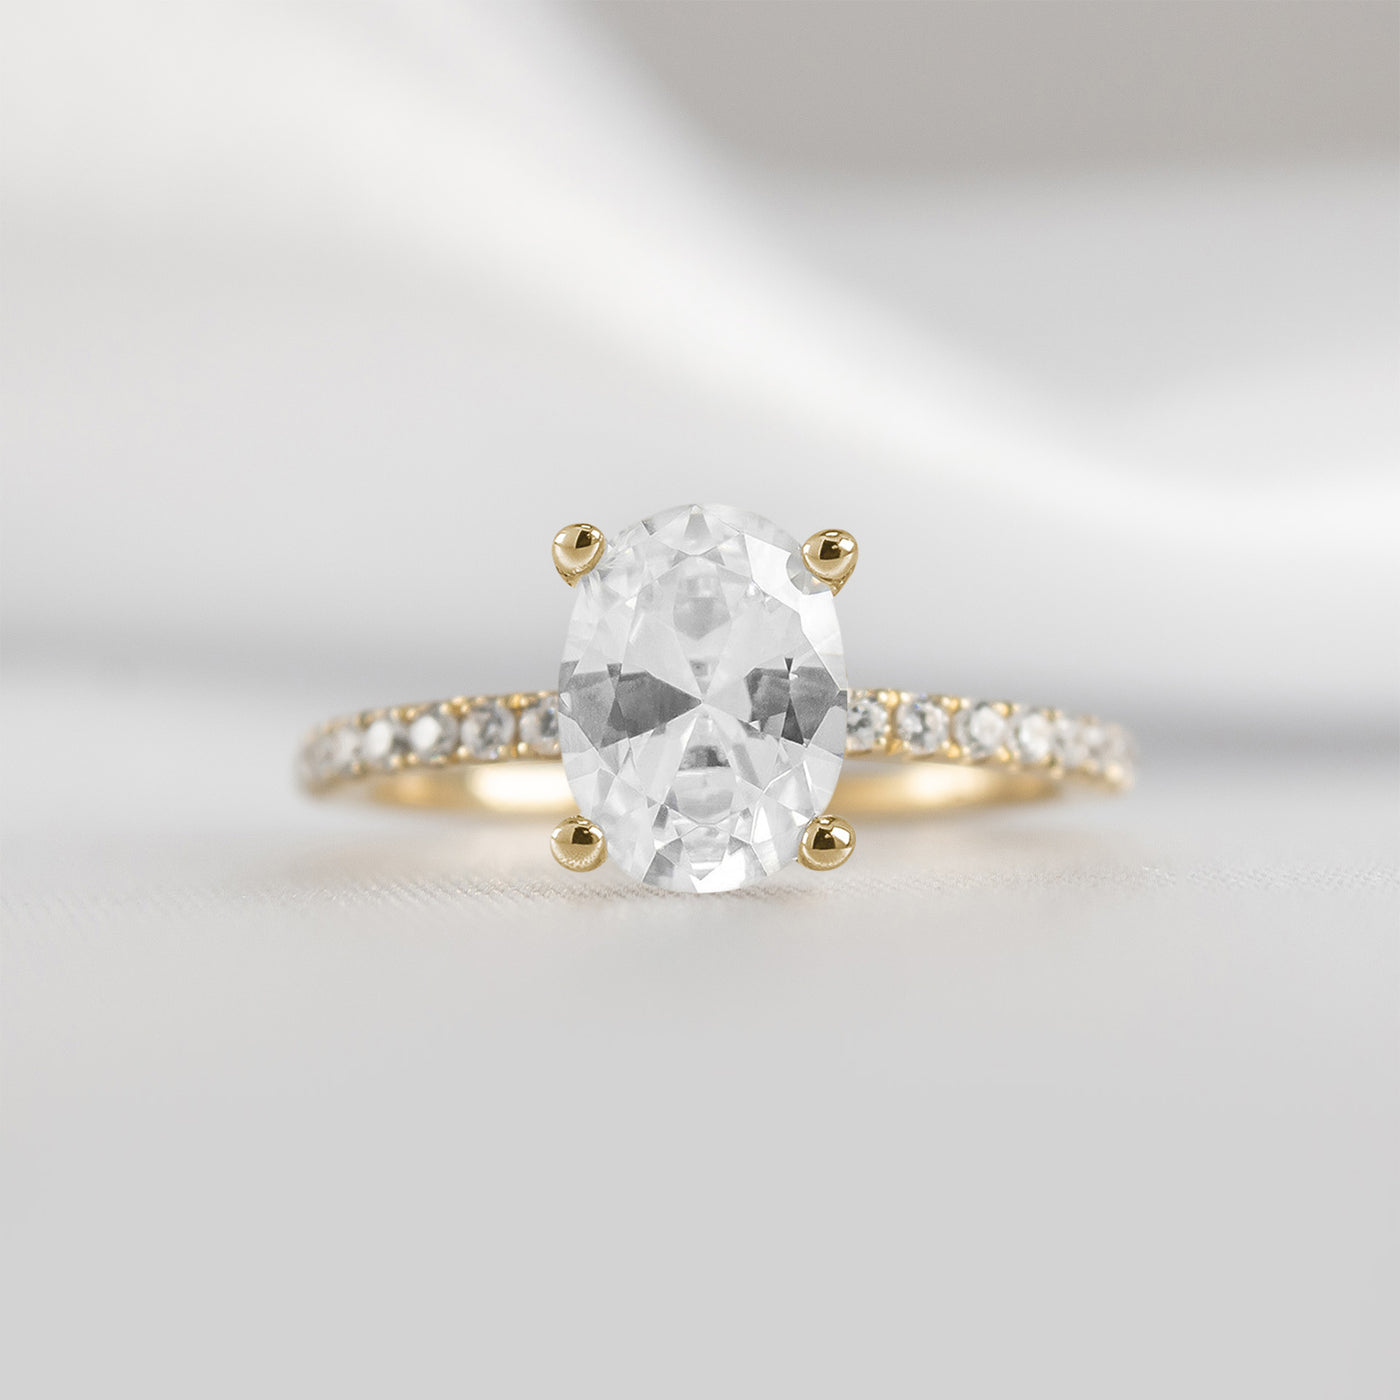 Shown in 1.5 carat * Cameron Hidden halo pave Diamond Engagement Ring | Lisa Robin#shape_oval